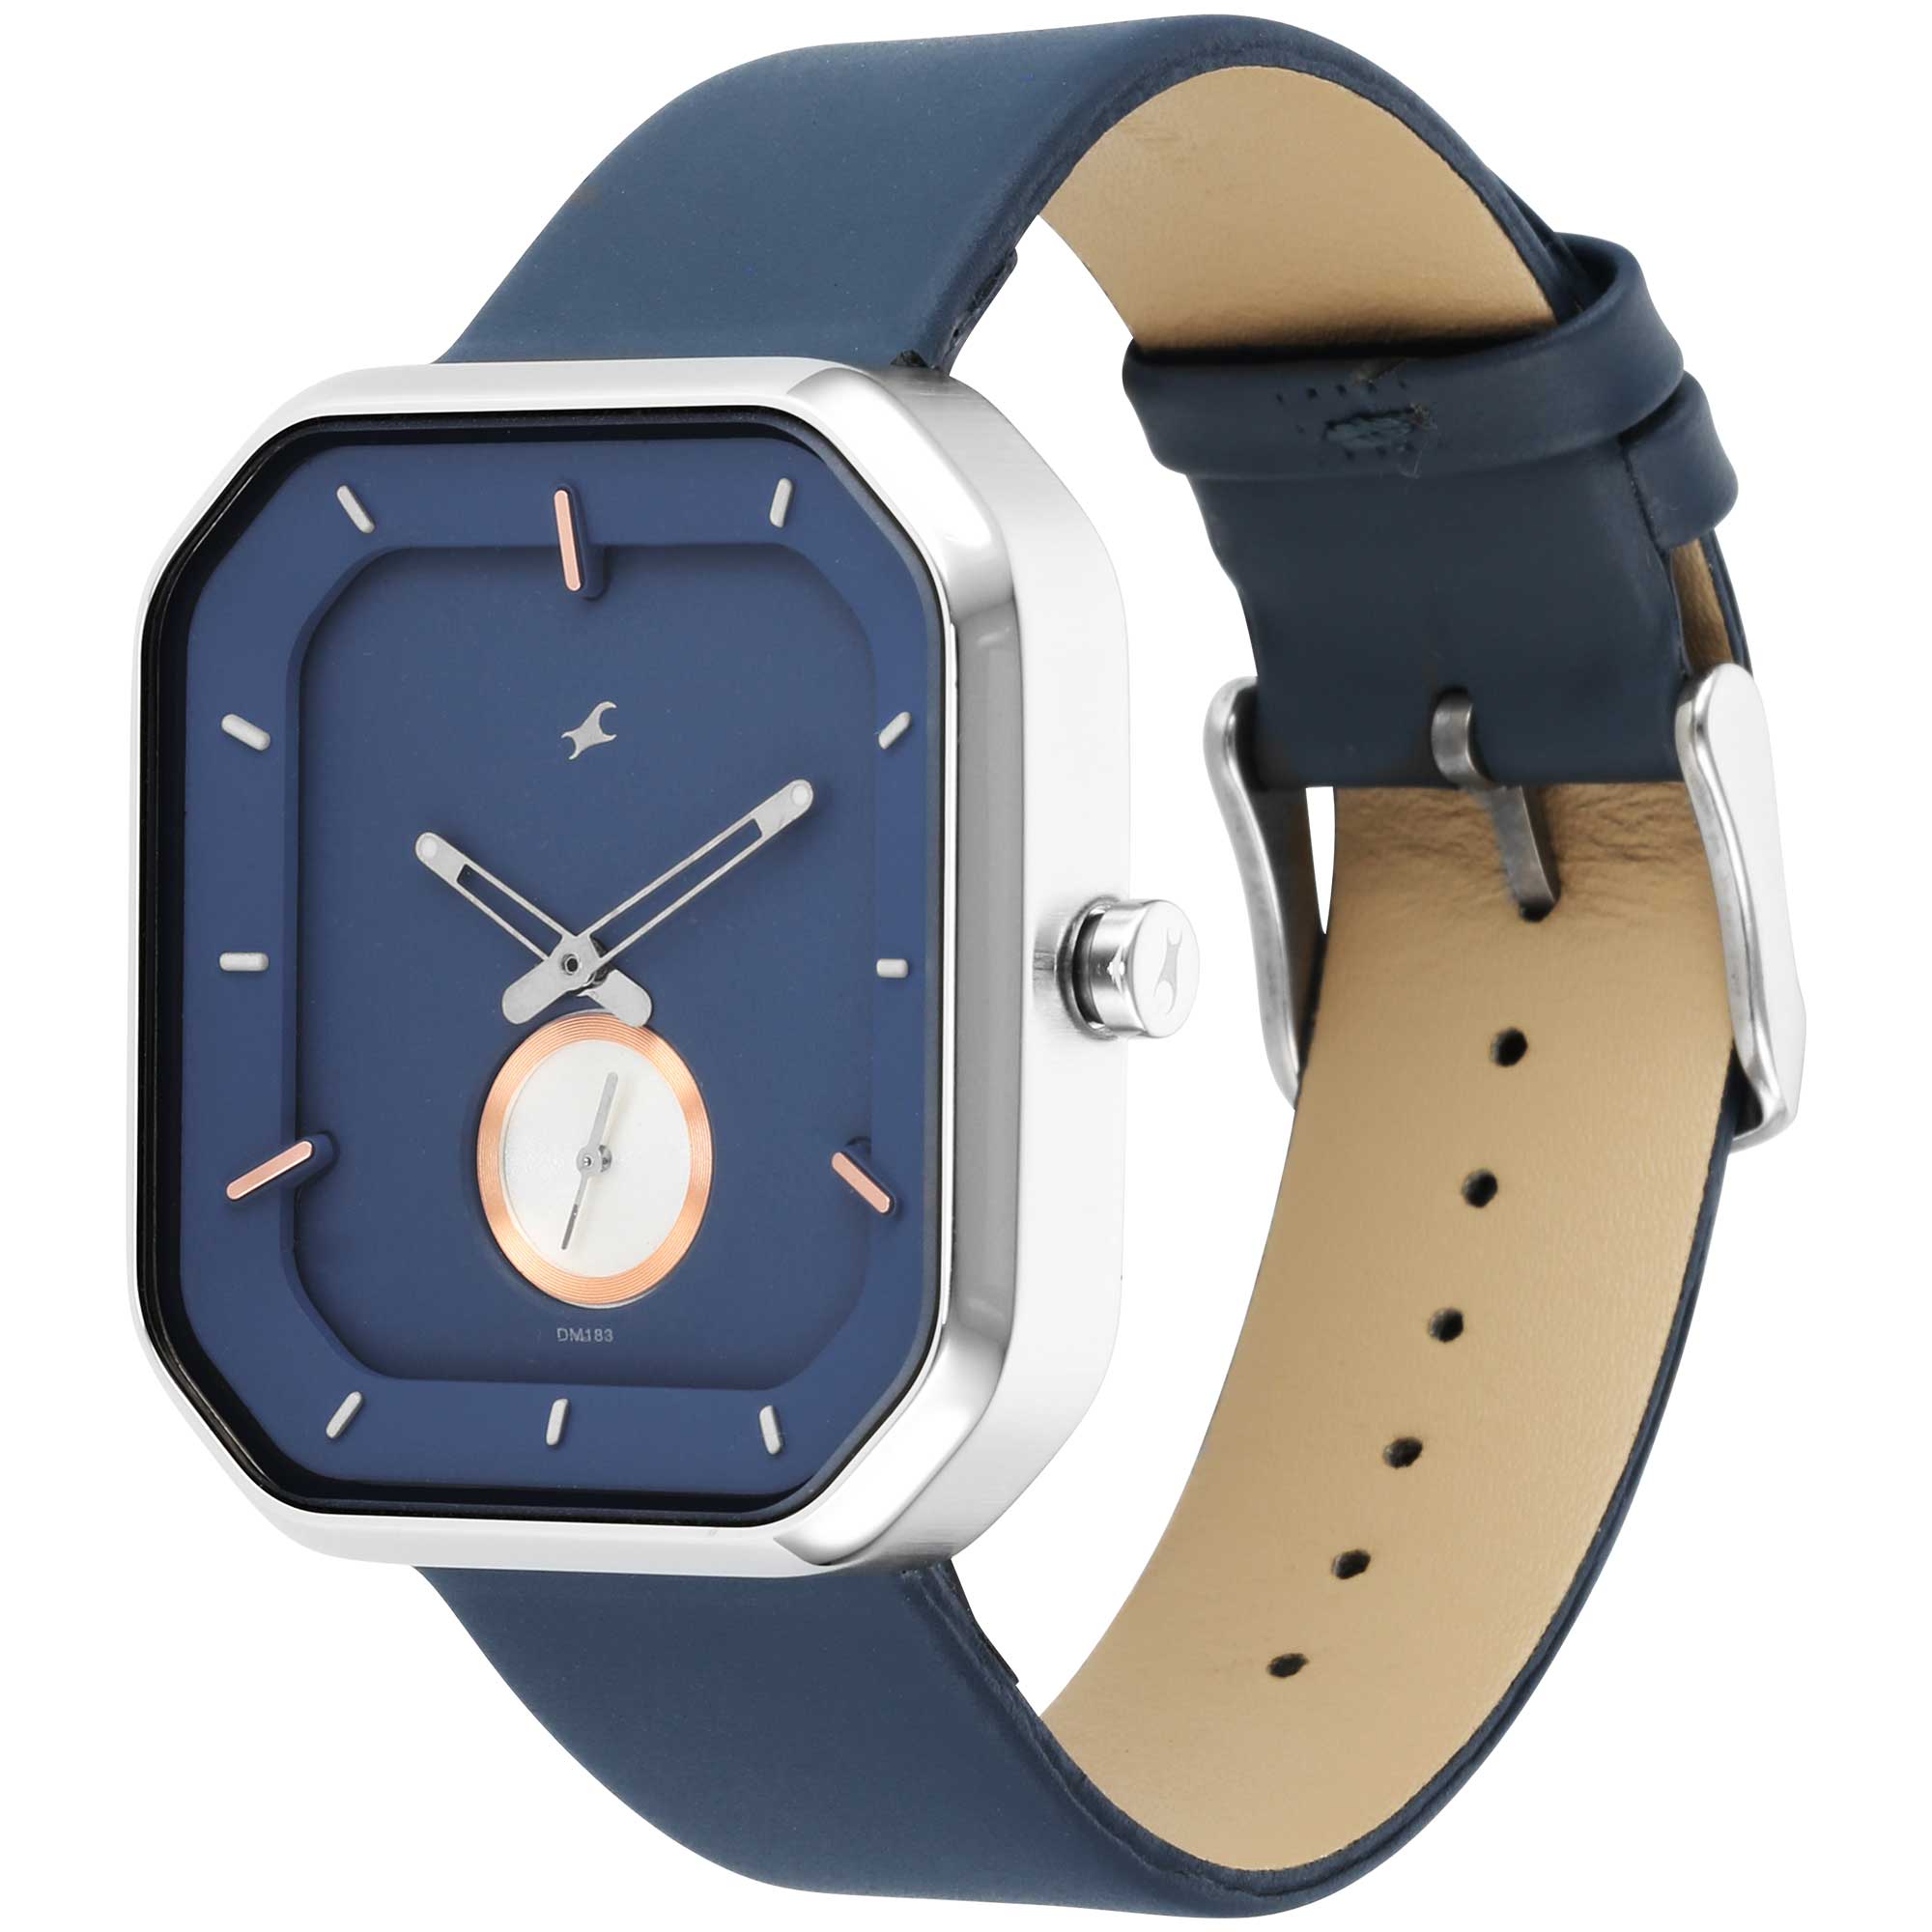 After Dark Blue Dial Leather Strap Watch for Guys